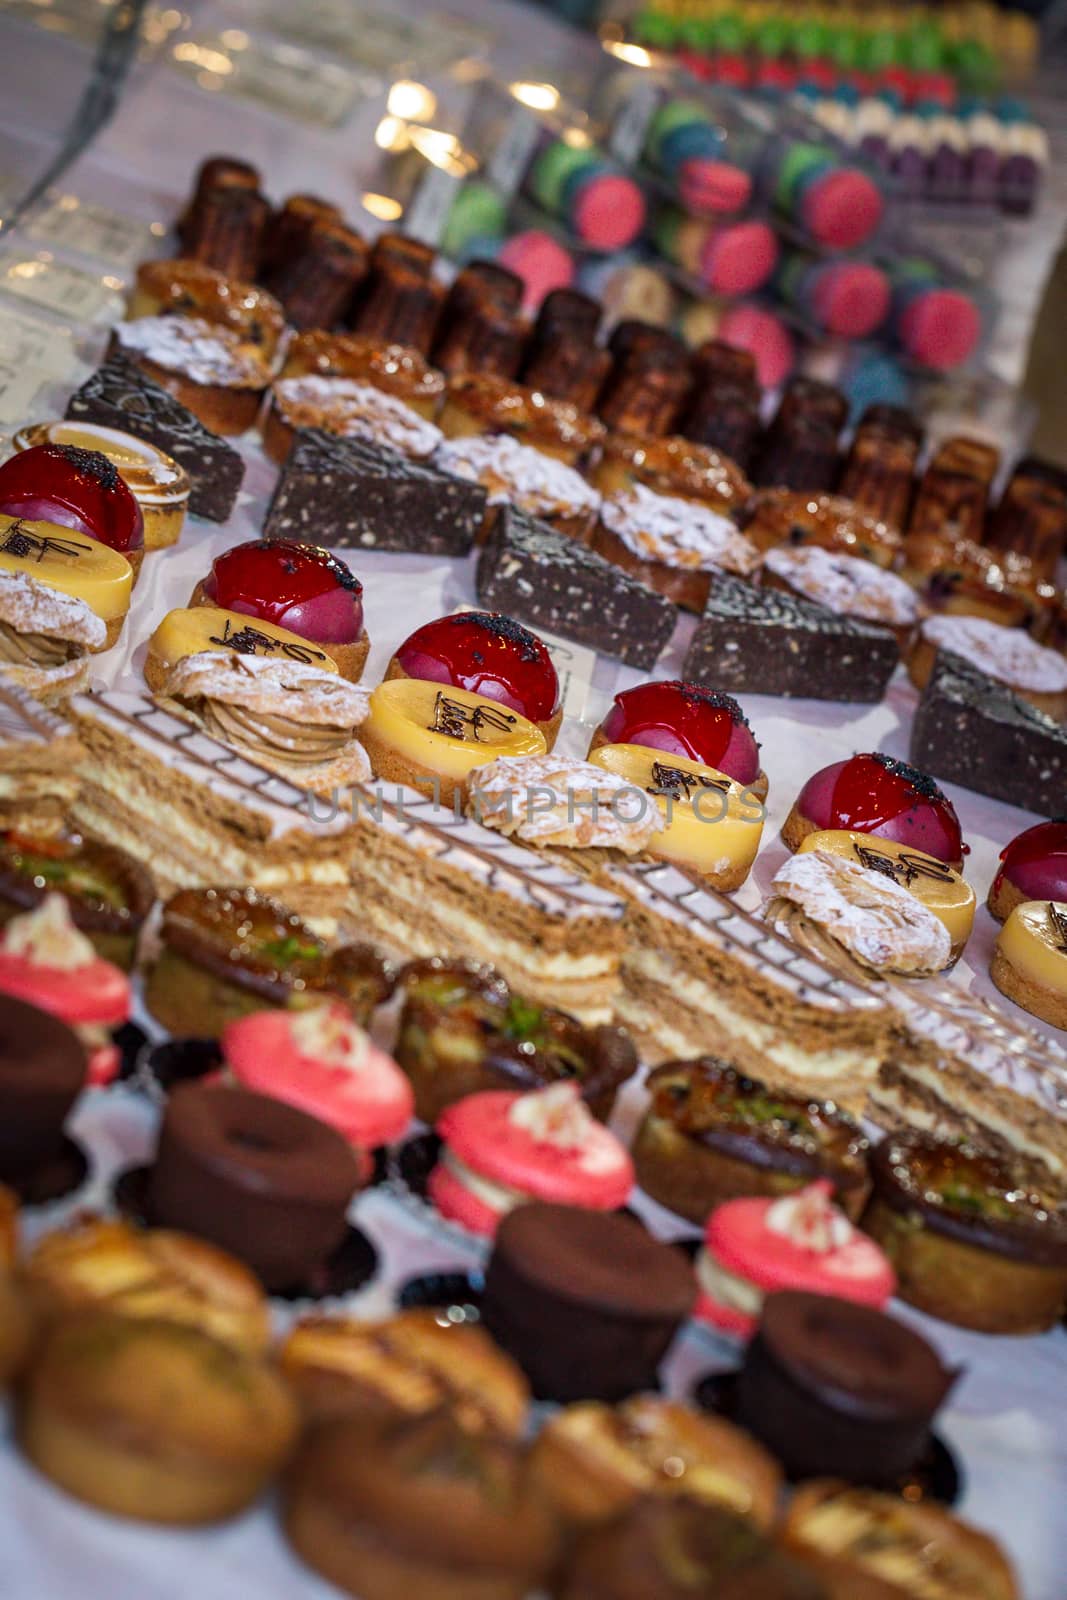 A variety of cakes on display at a market cake stall by magicbones